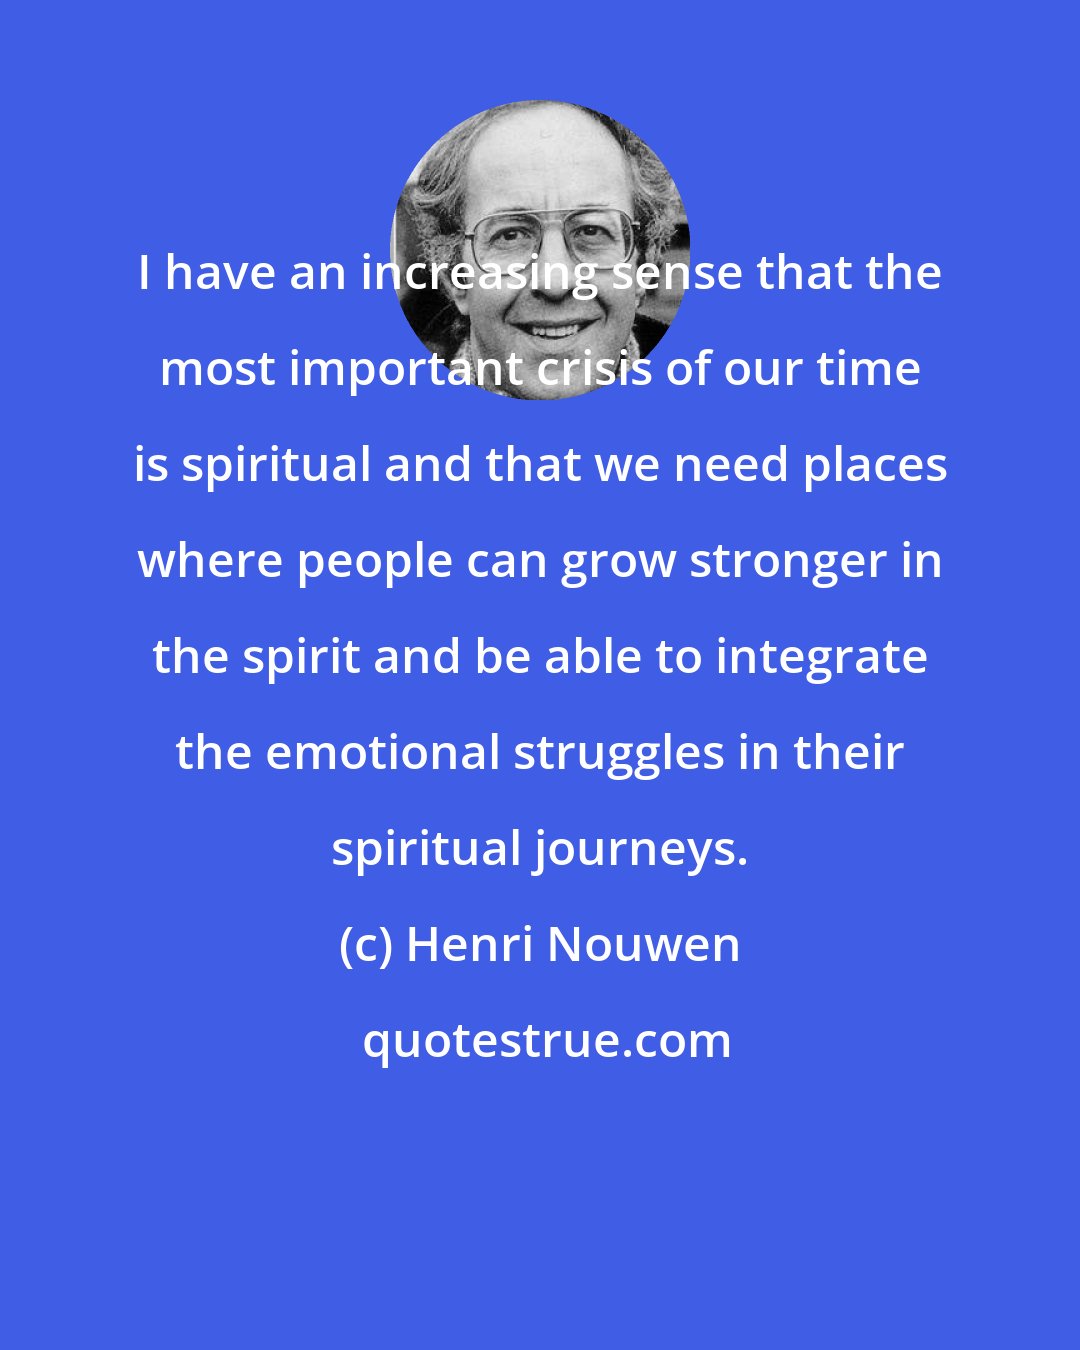 Henri Nouwen: I have an increasing sense that the most important crisis of our time is spiritual and that we need places where people can grow stronger in the spirit and be able to integrate the emotional struggles in their spiritual journeys.